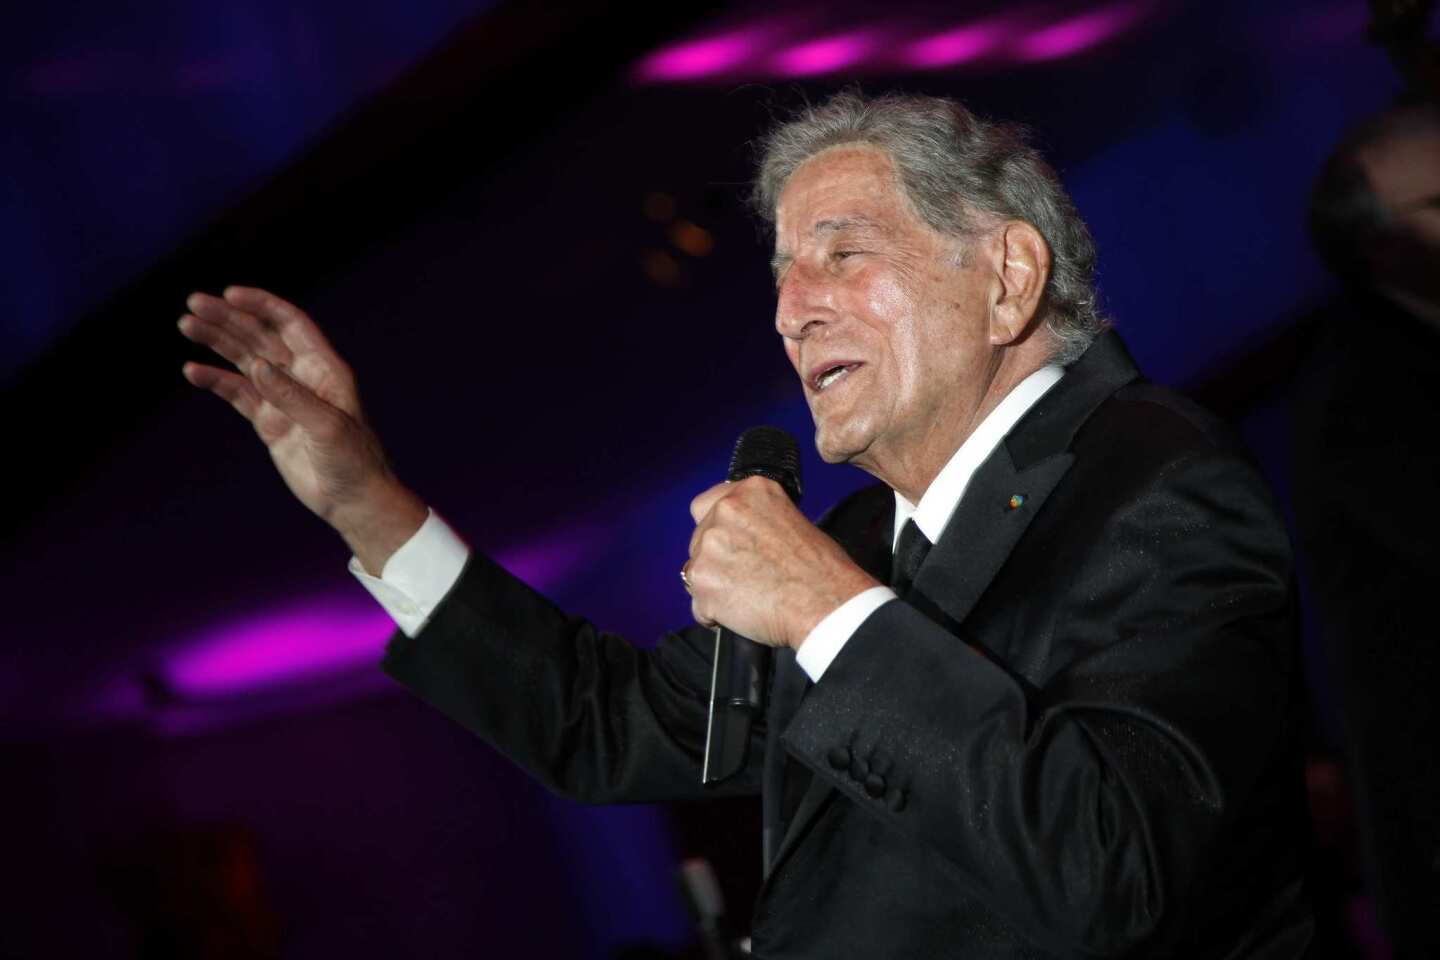 Tony Bennett performs for the stars after the Oscar ceremony.